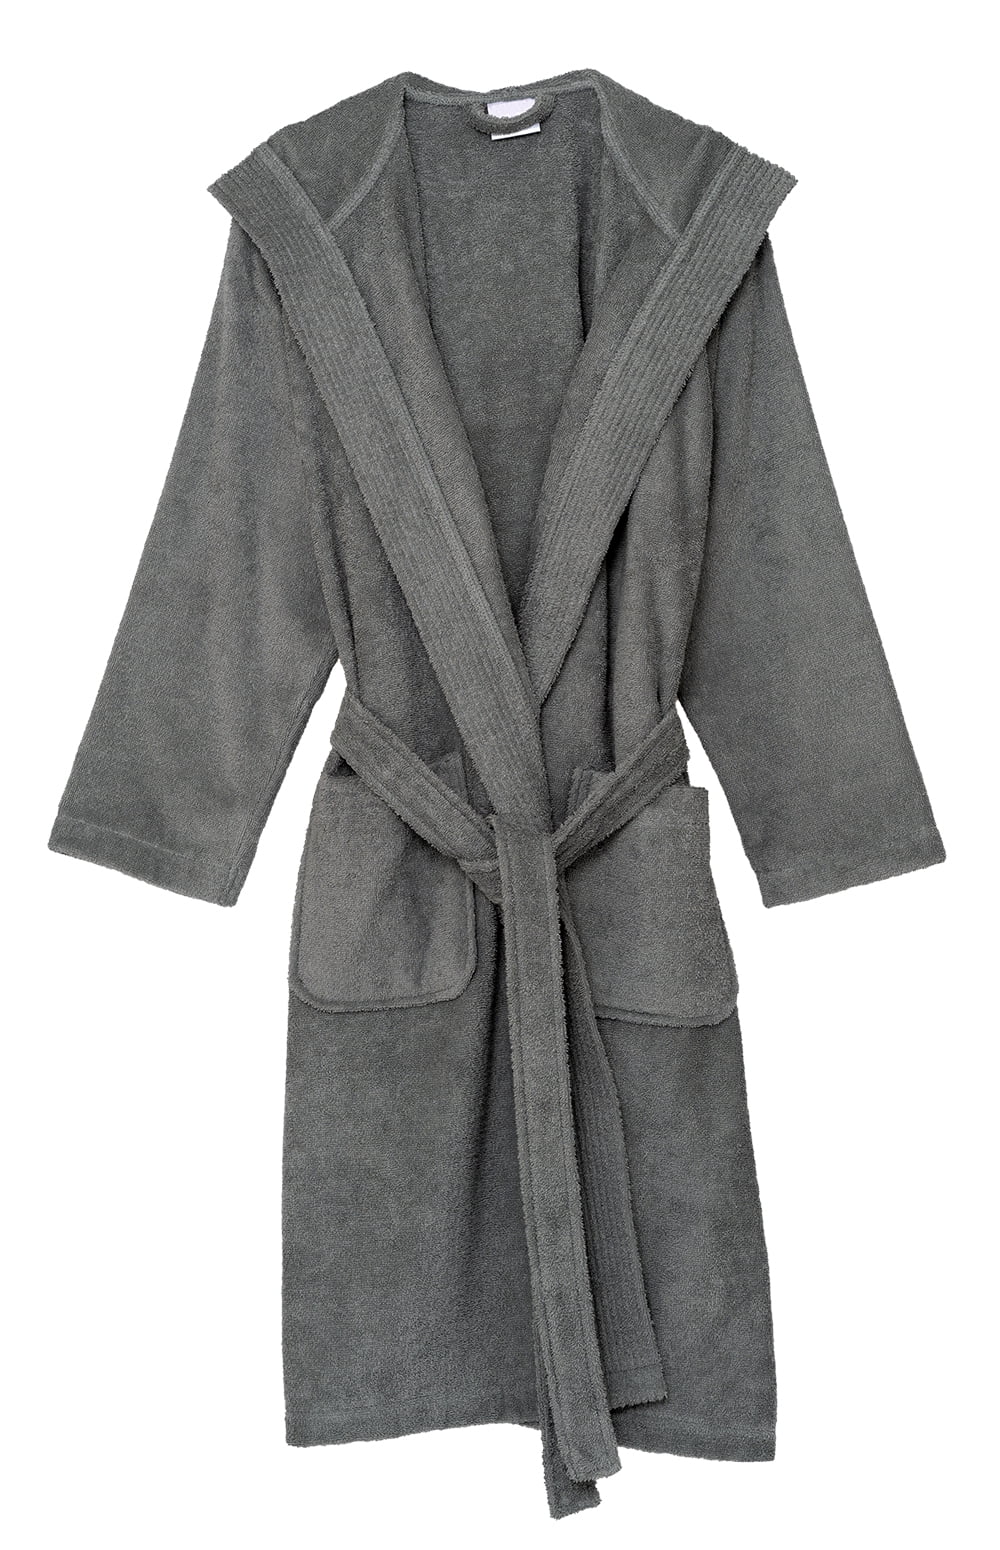 Towelselections Towelselections Womens Hooded Robe Cotton Terry Cloth Bathrobe 